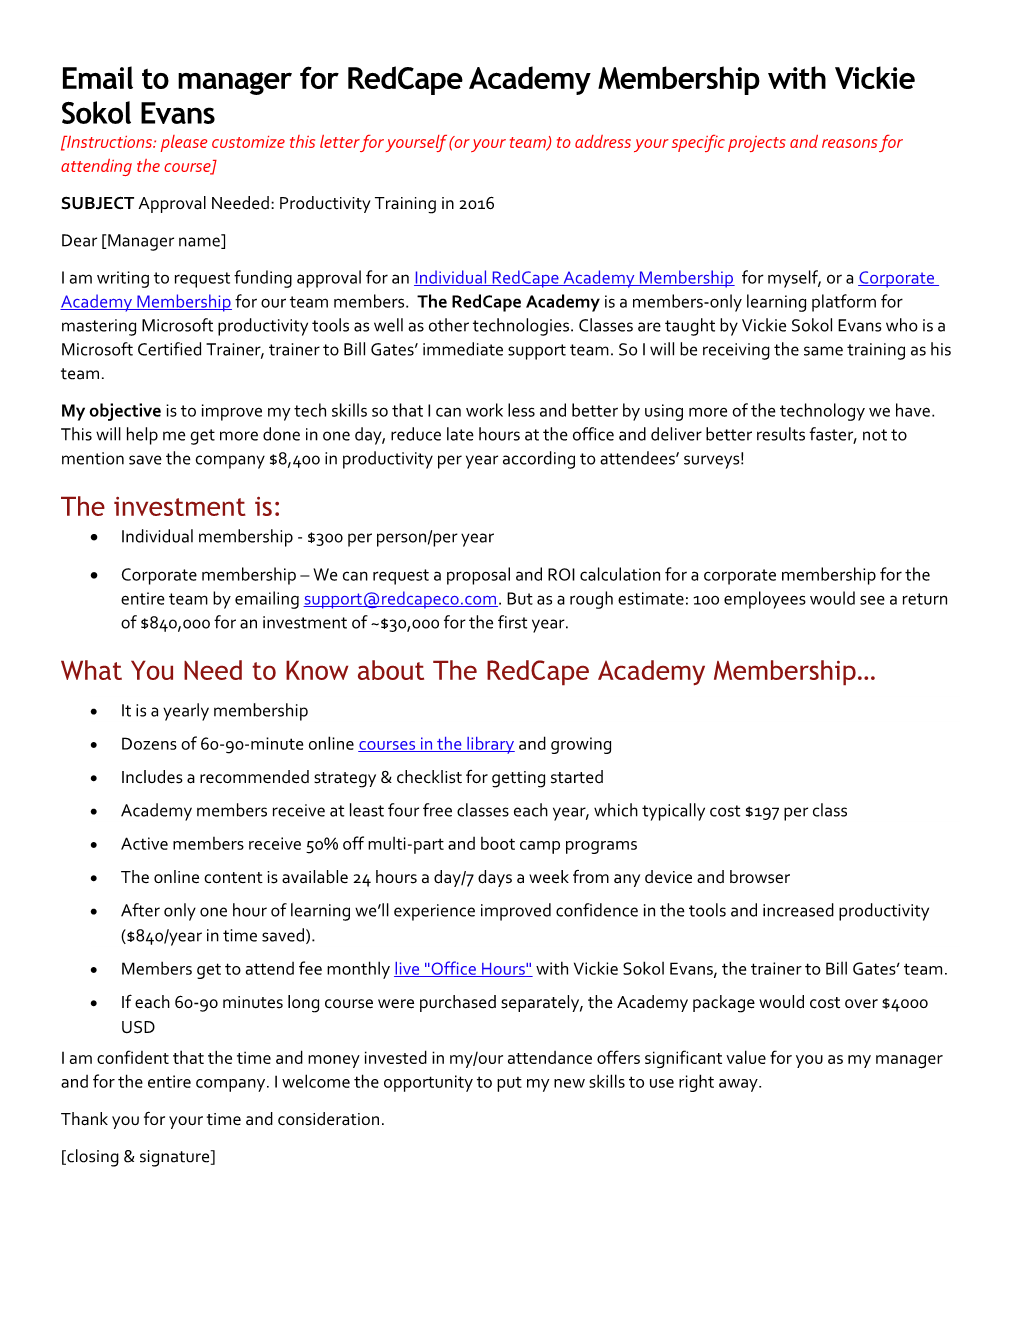 Email to Manager for Redcape Academy Membershipwith Vickie Sokol Evans